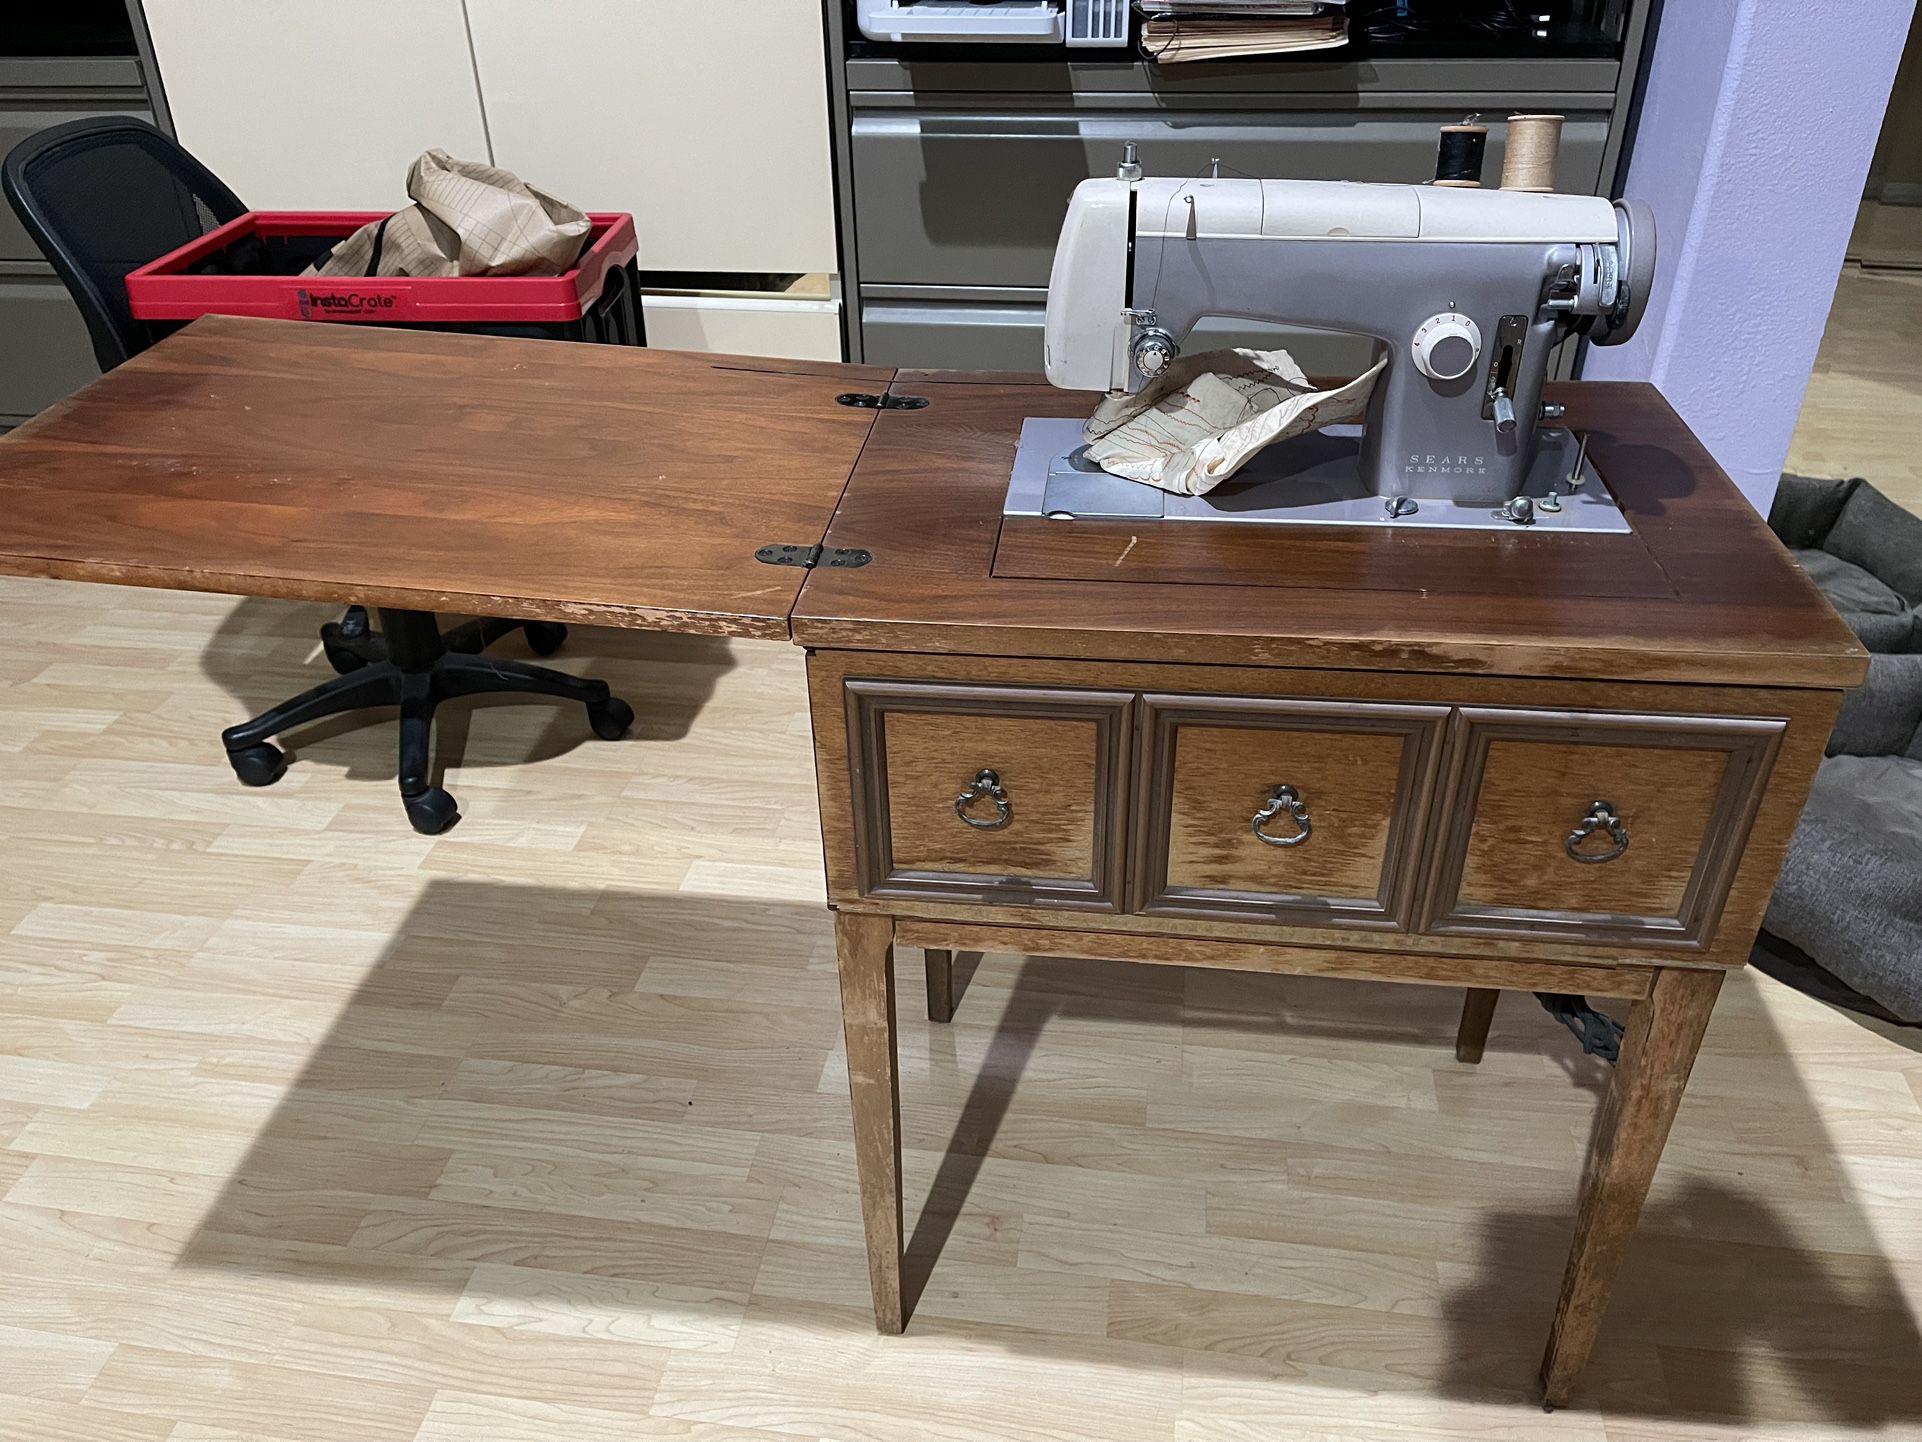 Sears Kenmore Sewing Machine with Sewing Table - Antiques